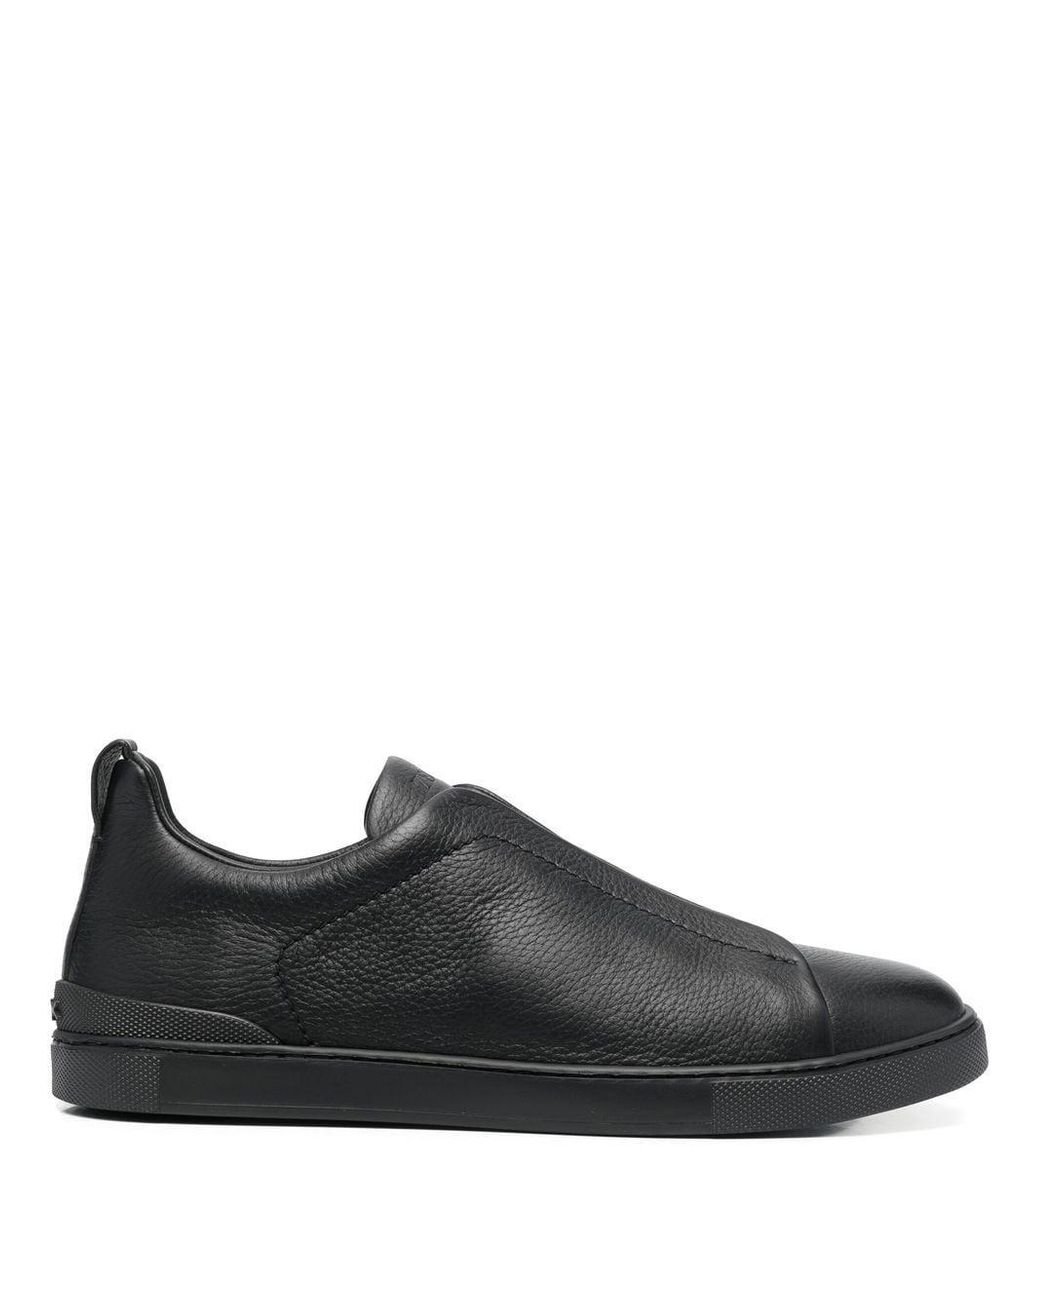 Zegna Panelled Leather Slip-on Sneakers in Black for Men | Lyst